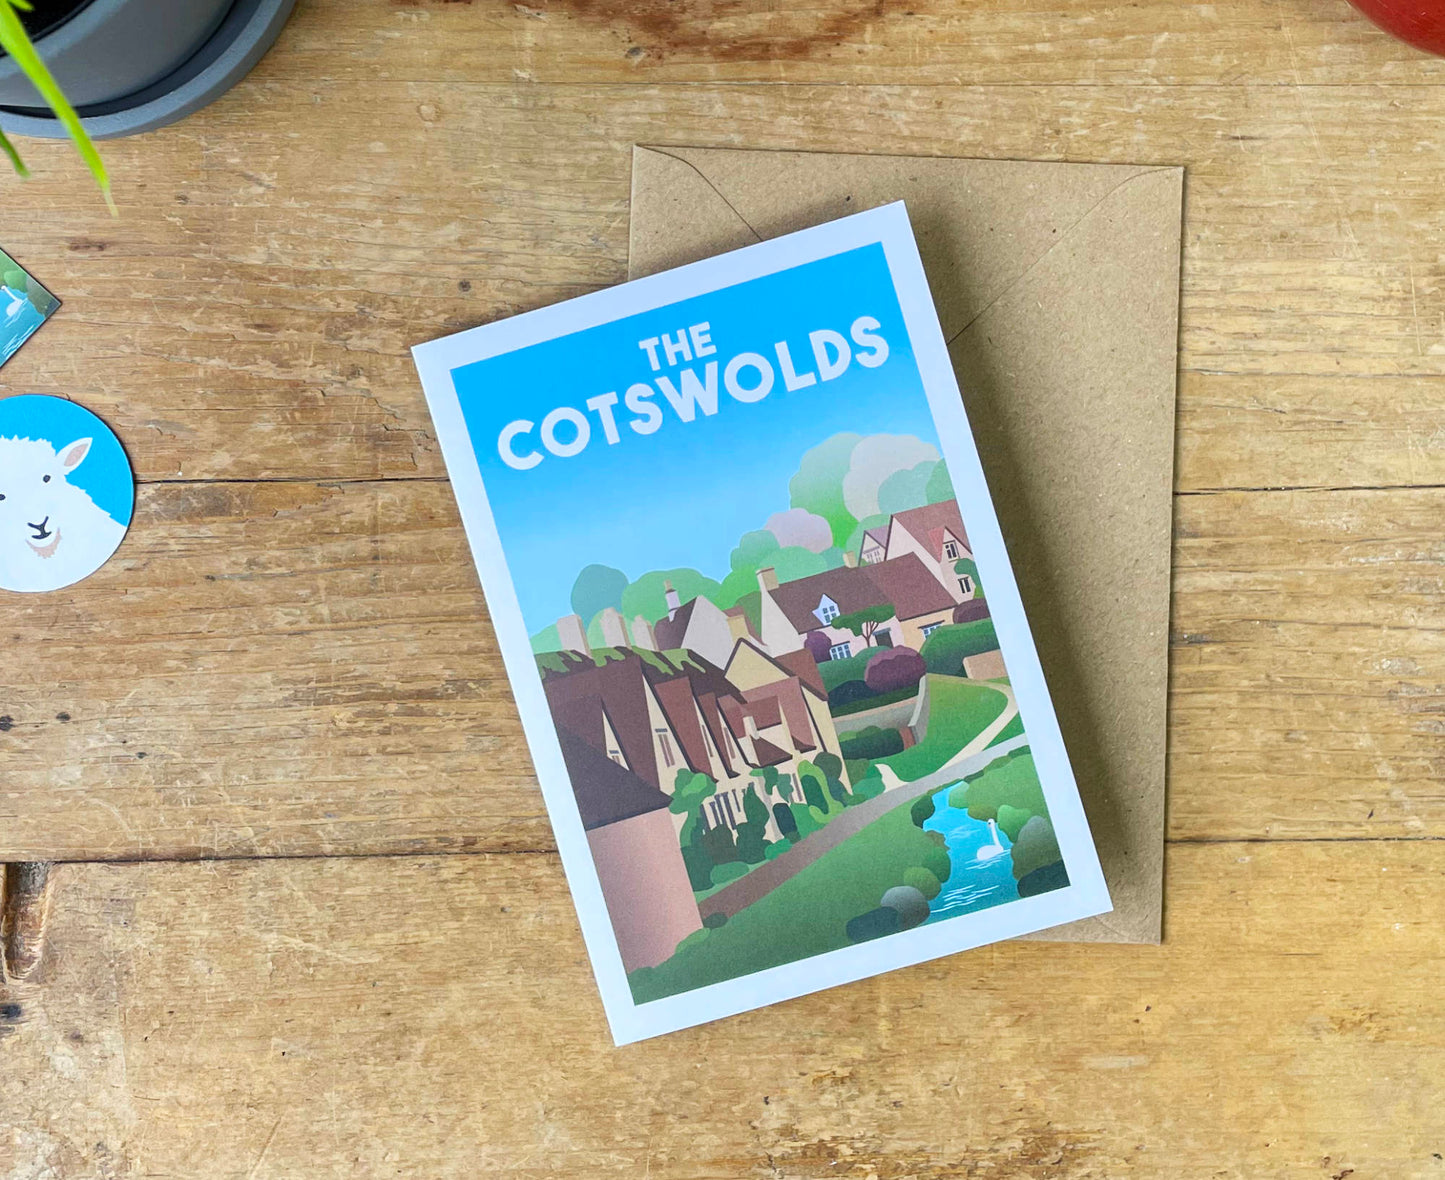 The Cotswolds Bibury Greeting Card on table